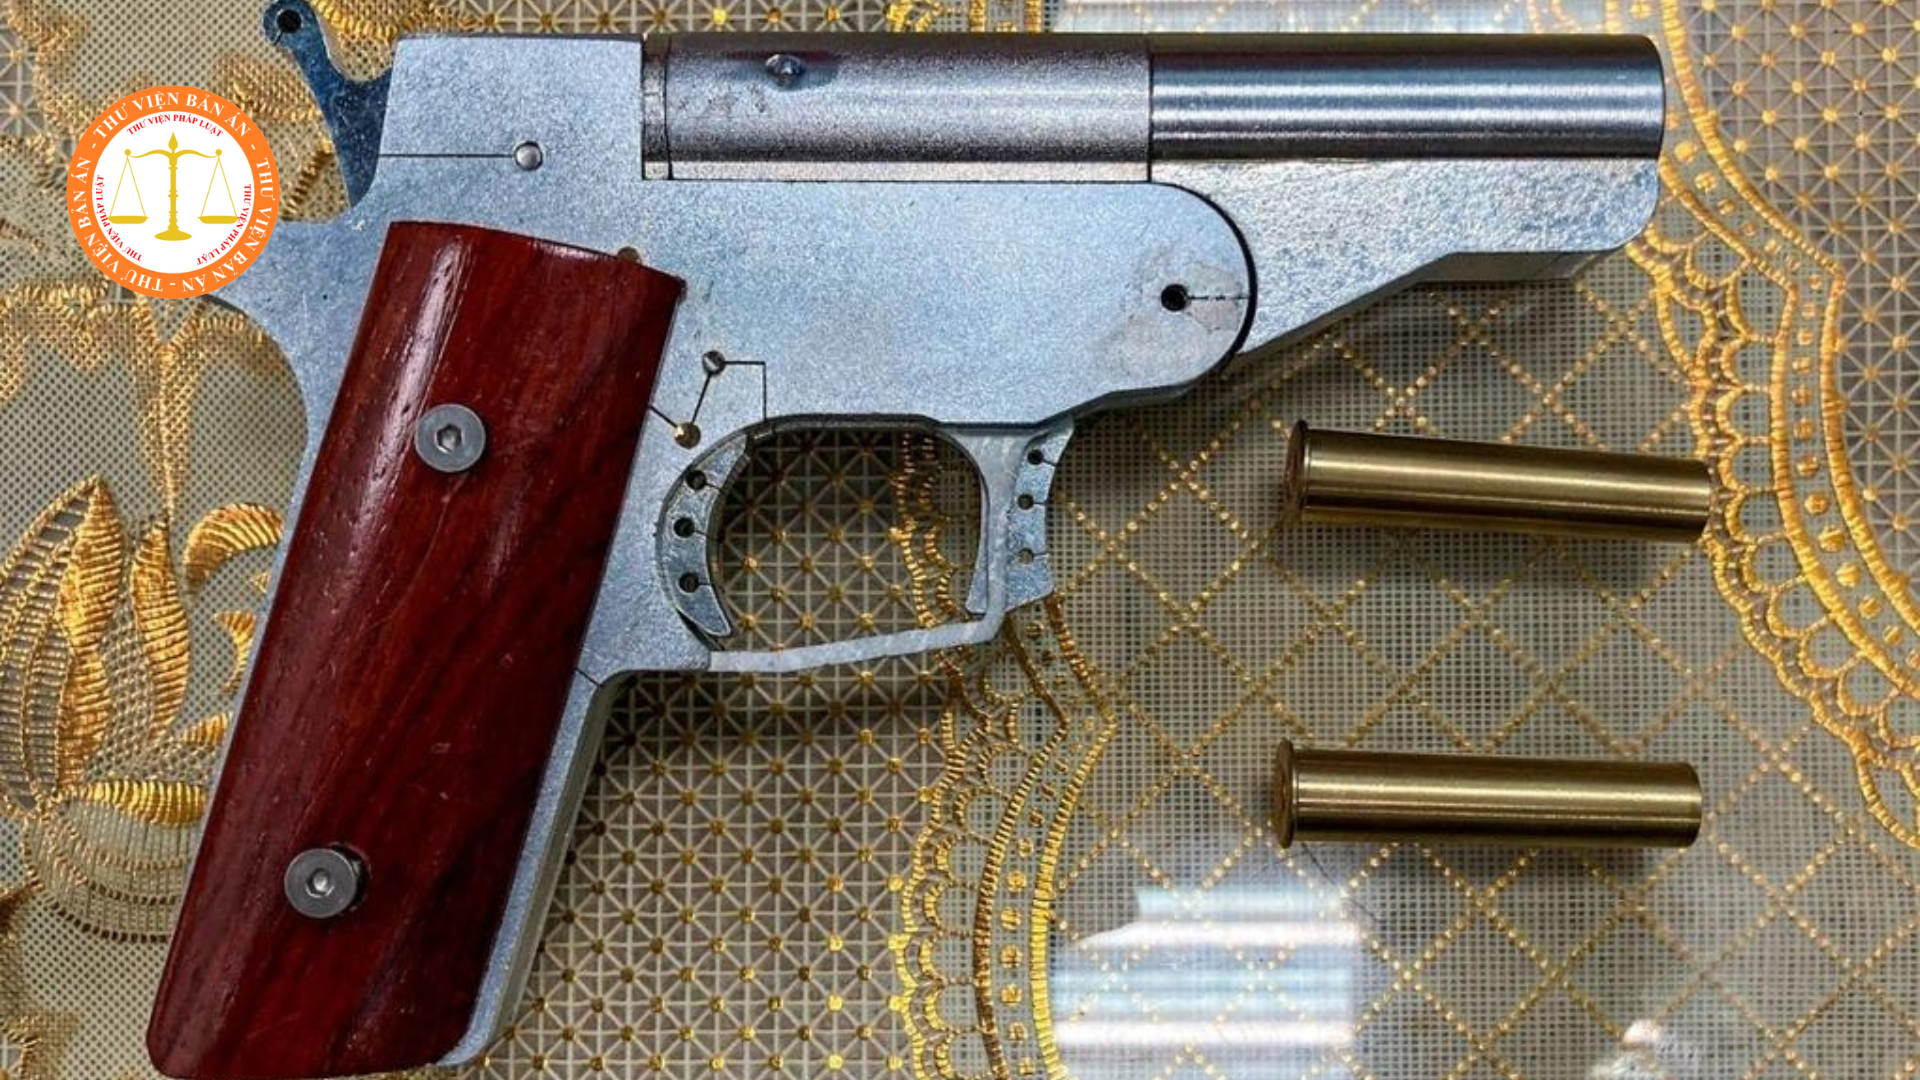 What are the penalties for trading of illegal self-made guns in Vietnam?